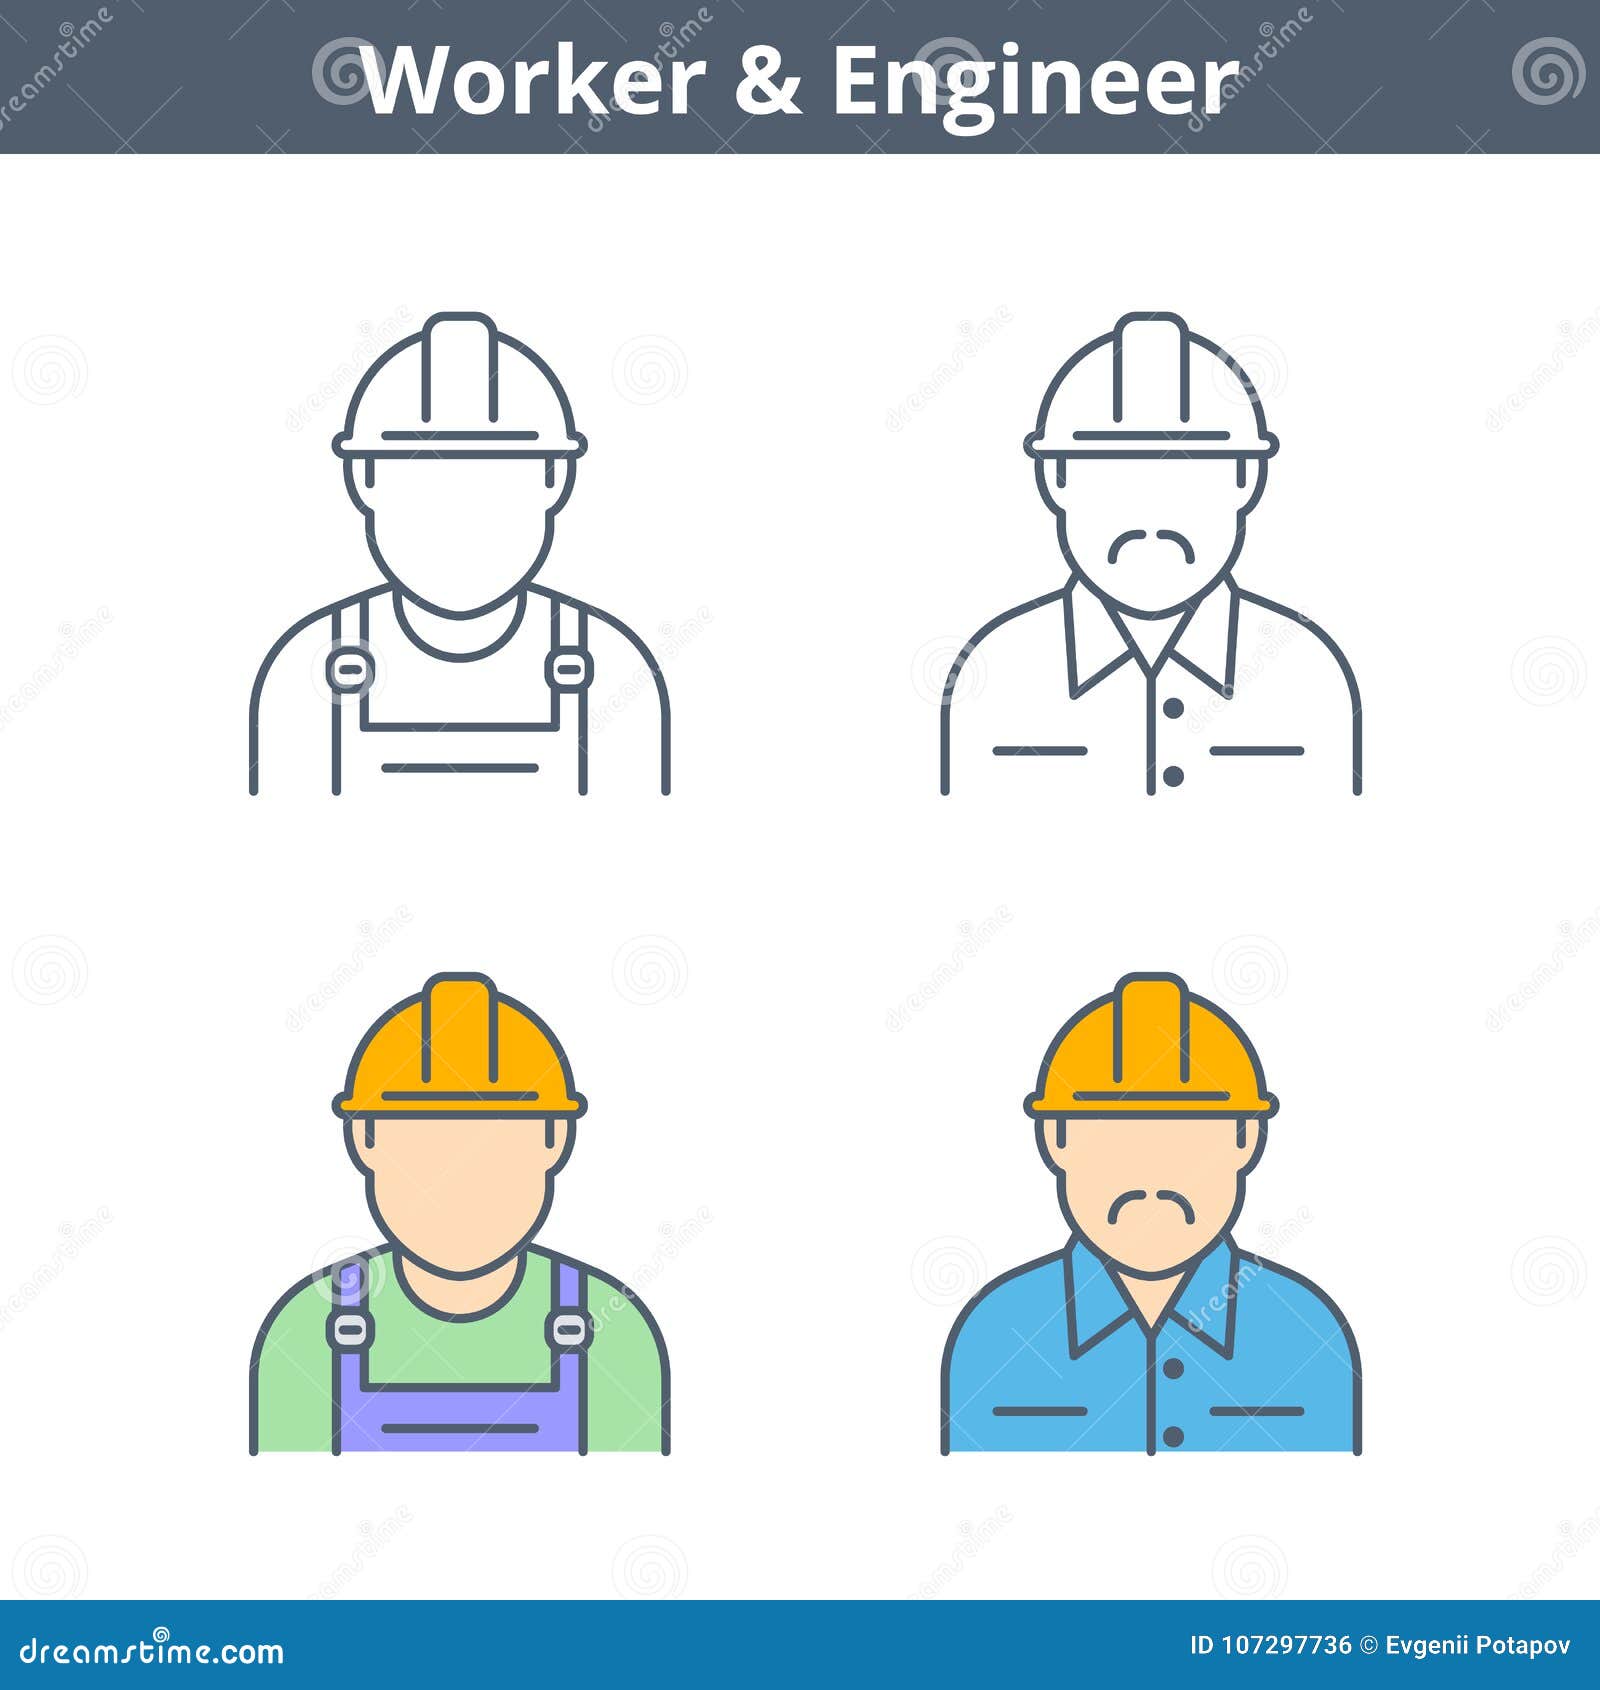 Occupations Linear Avatar Set Engineer Worker Thin Outline Icons